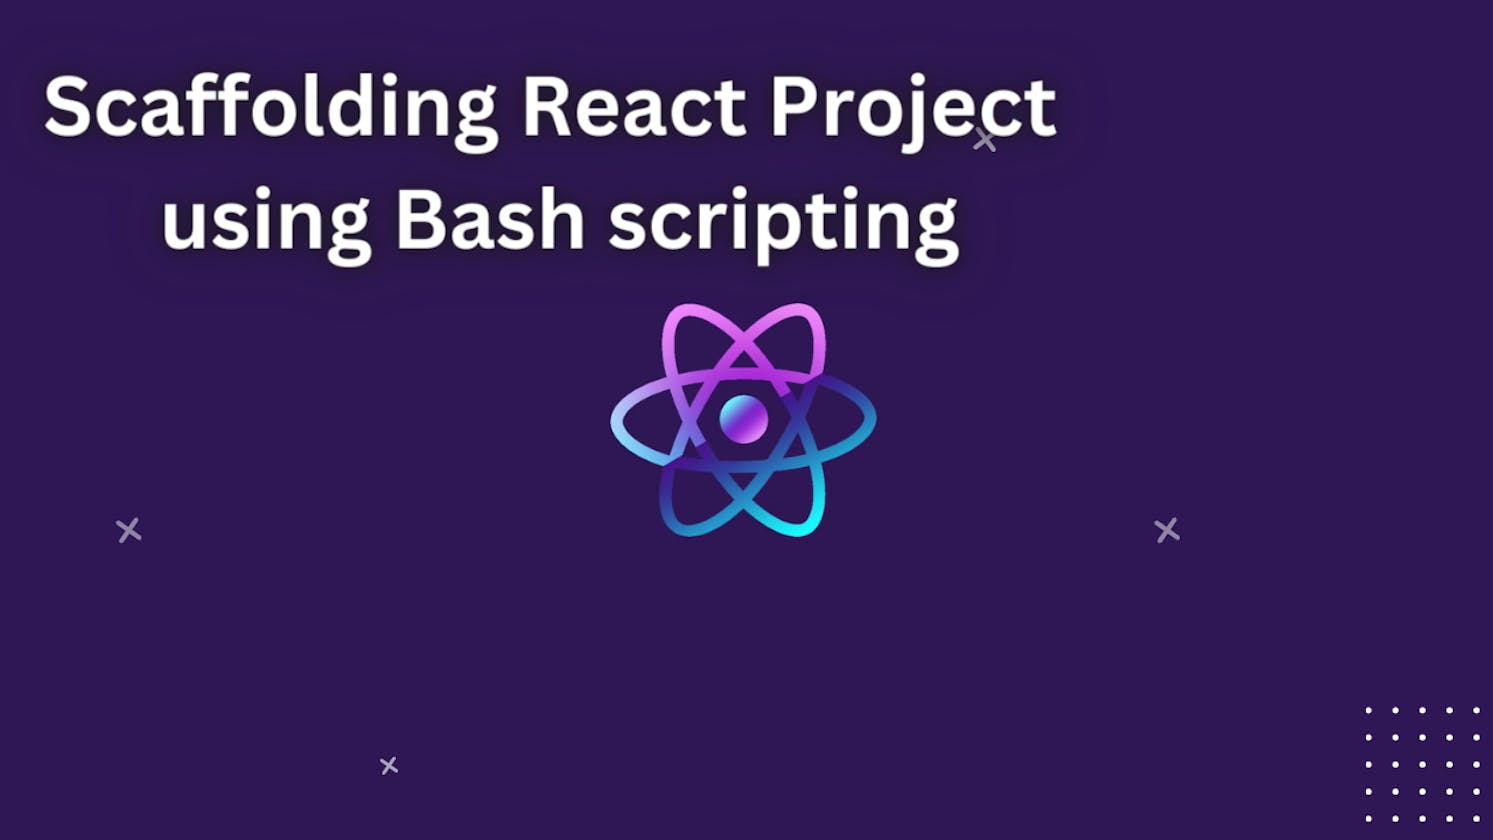 Scaffolding React Project using Bash scripting